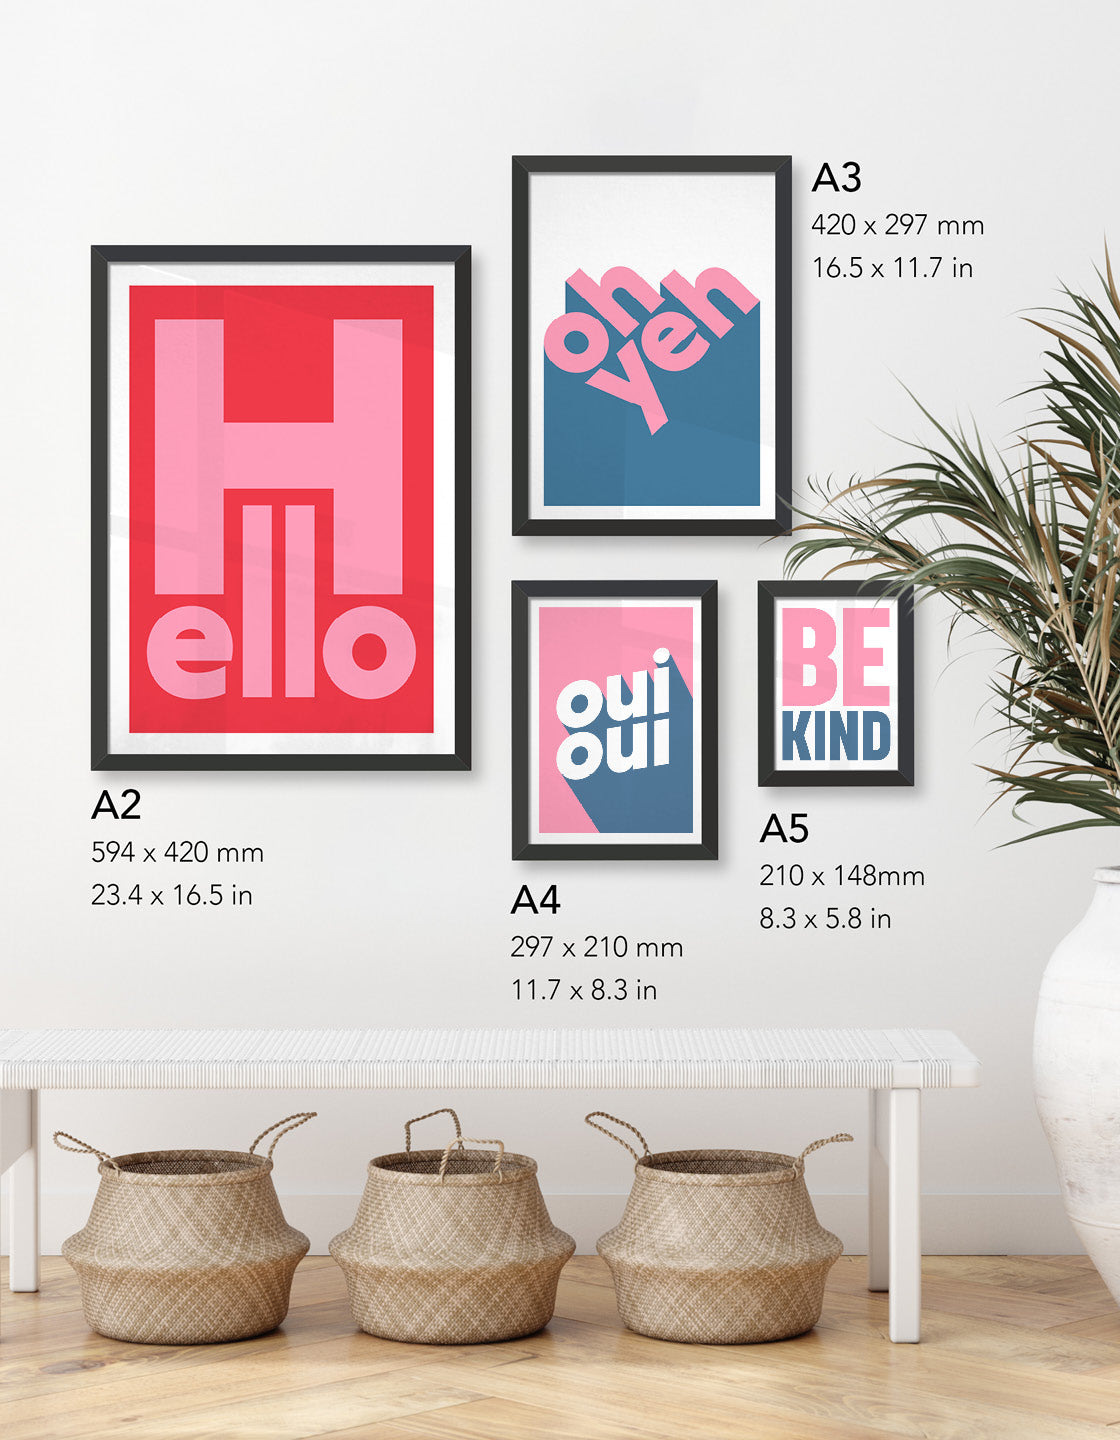 Image showing the visual difference in sizes of prints available